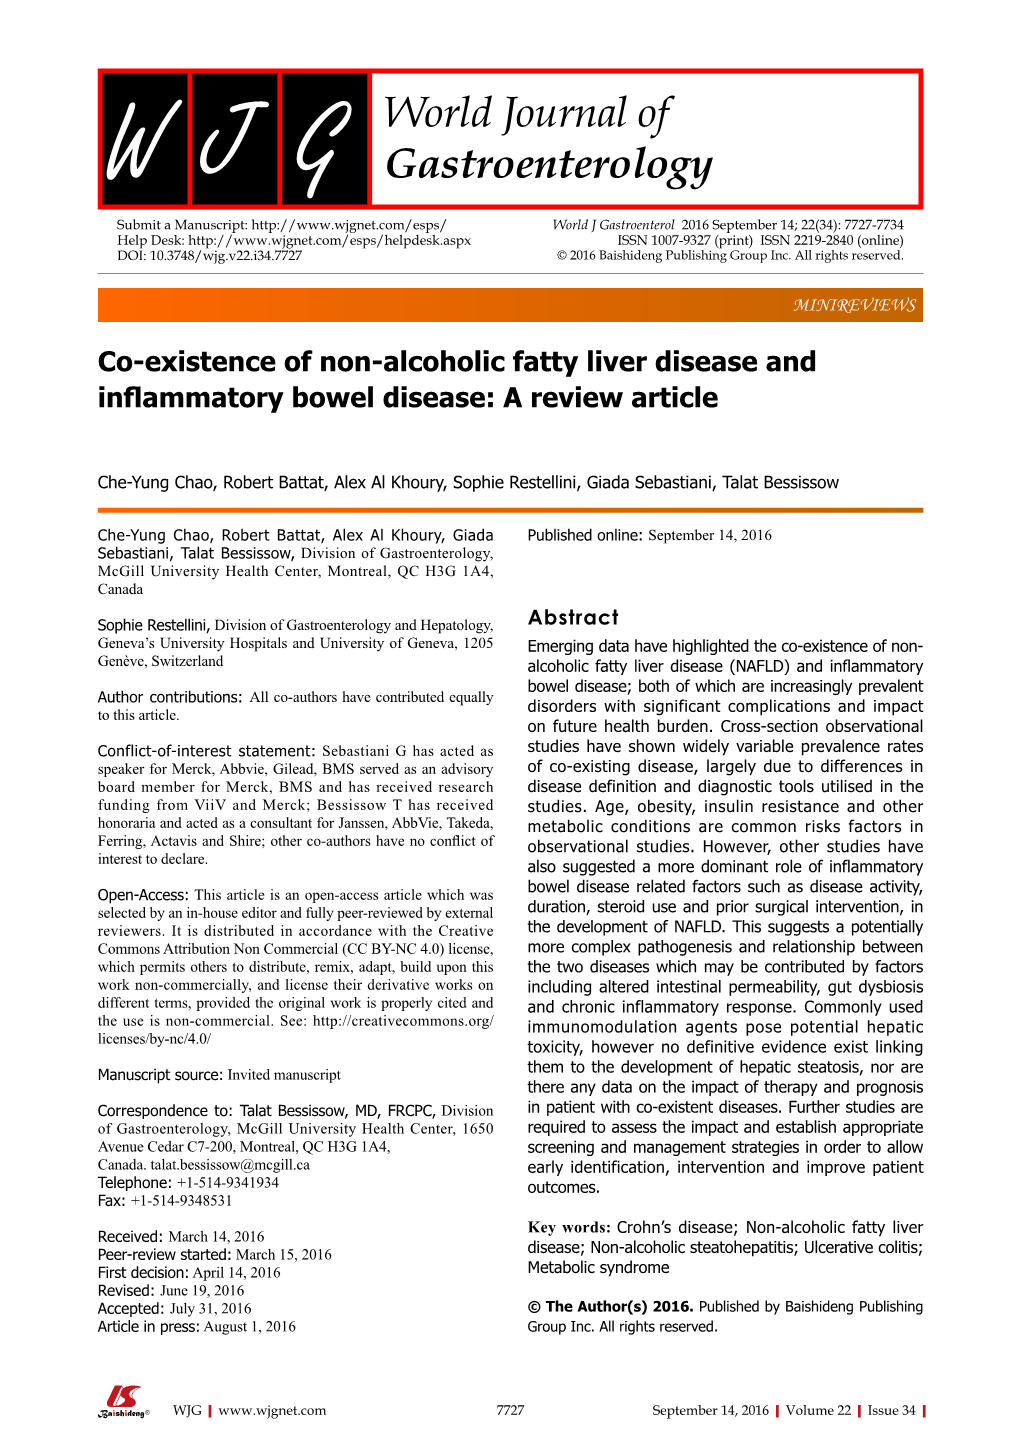 Co-Existence of Non-Alcoholic Fatty Liver Disease and Inflammatory Bowel Disease:A Review Article